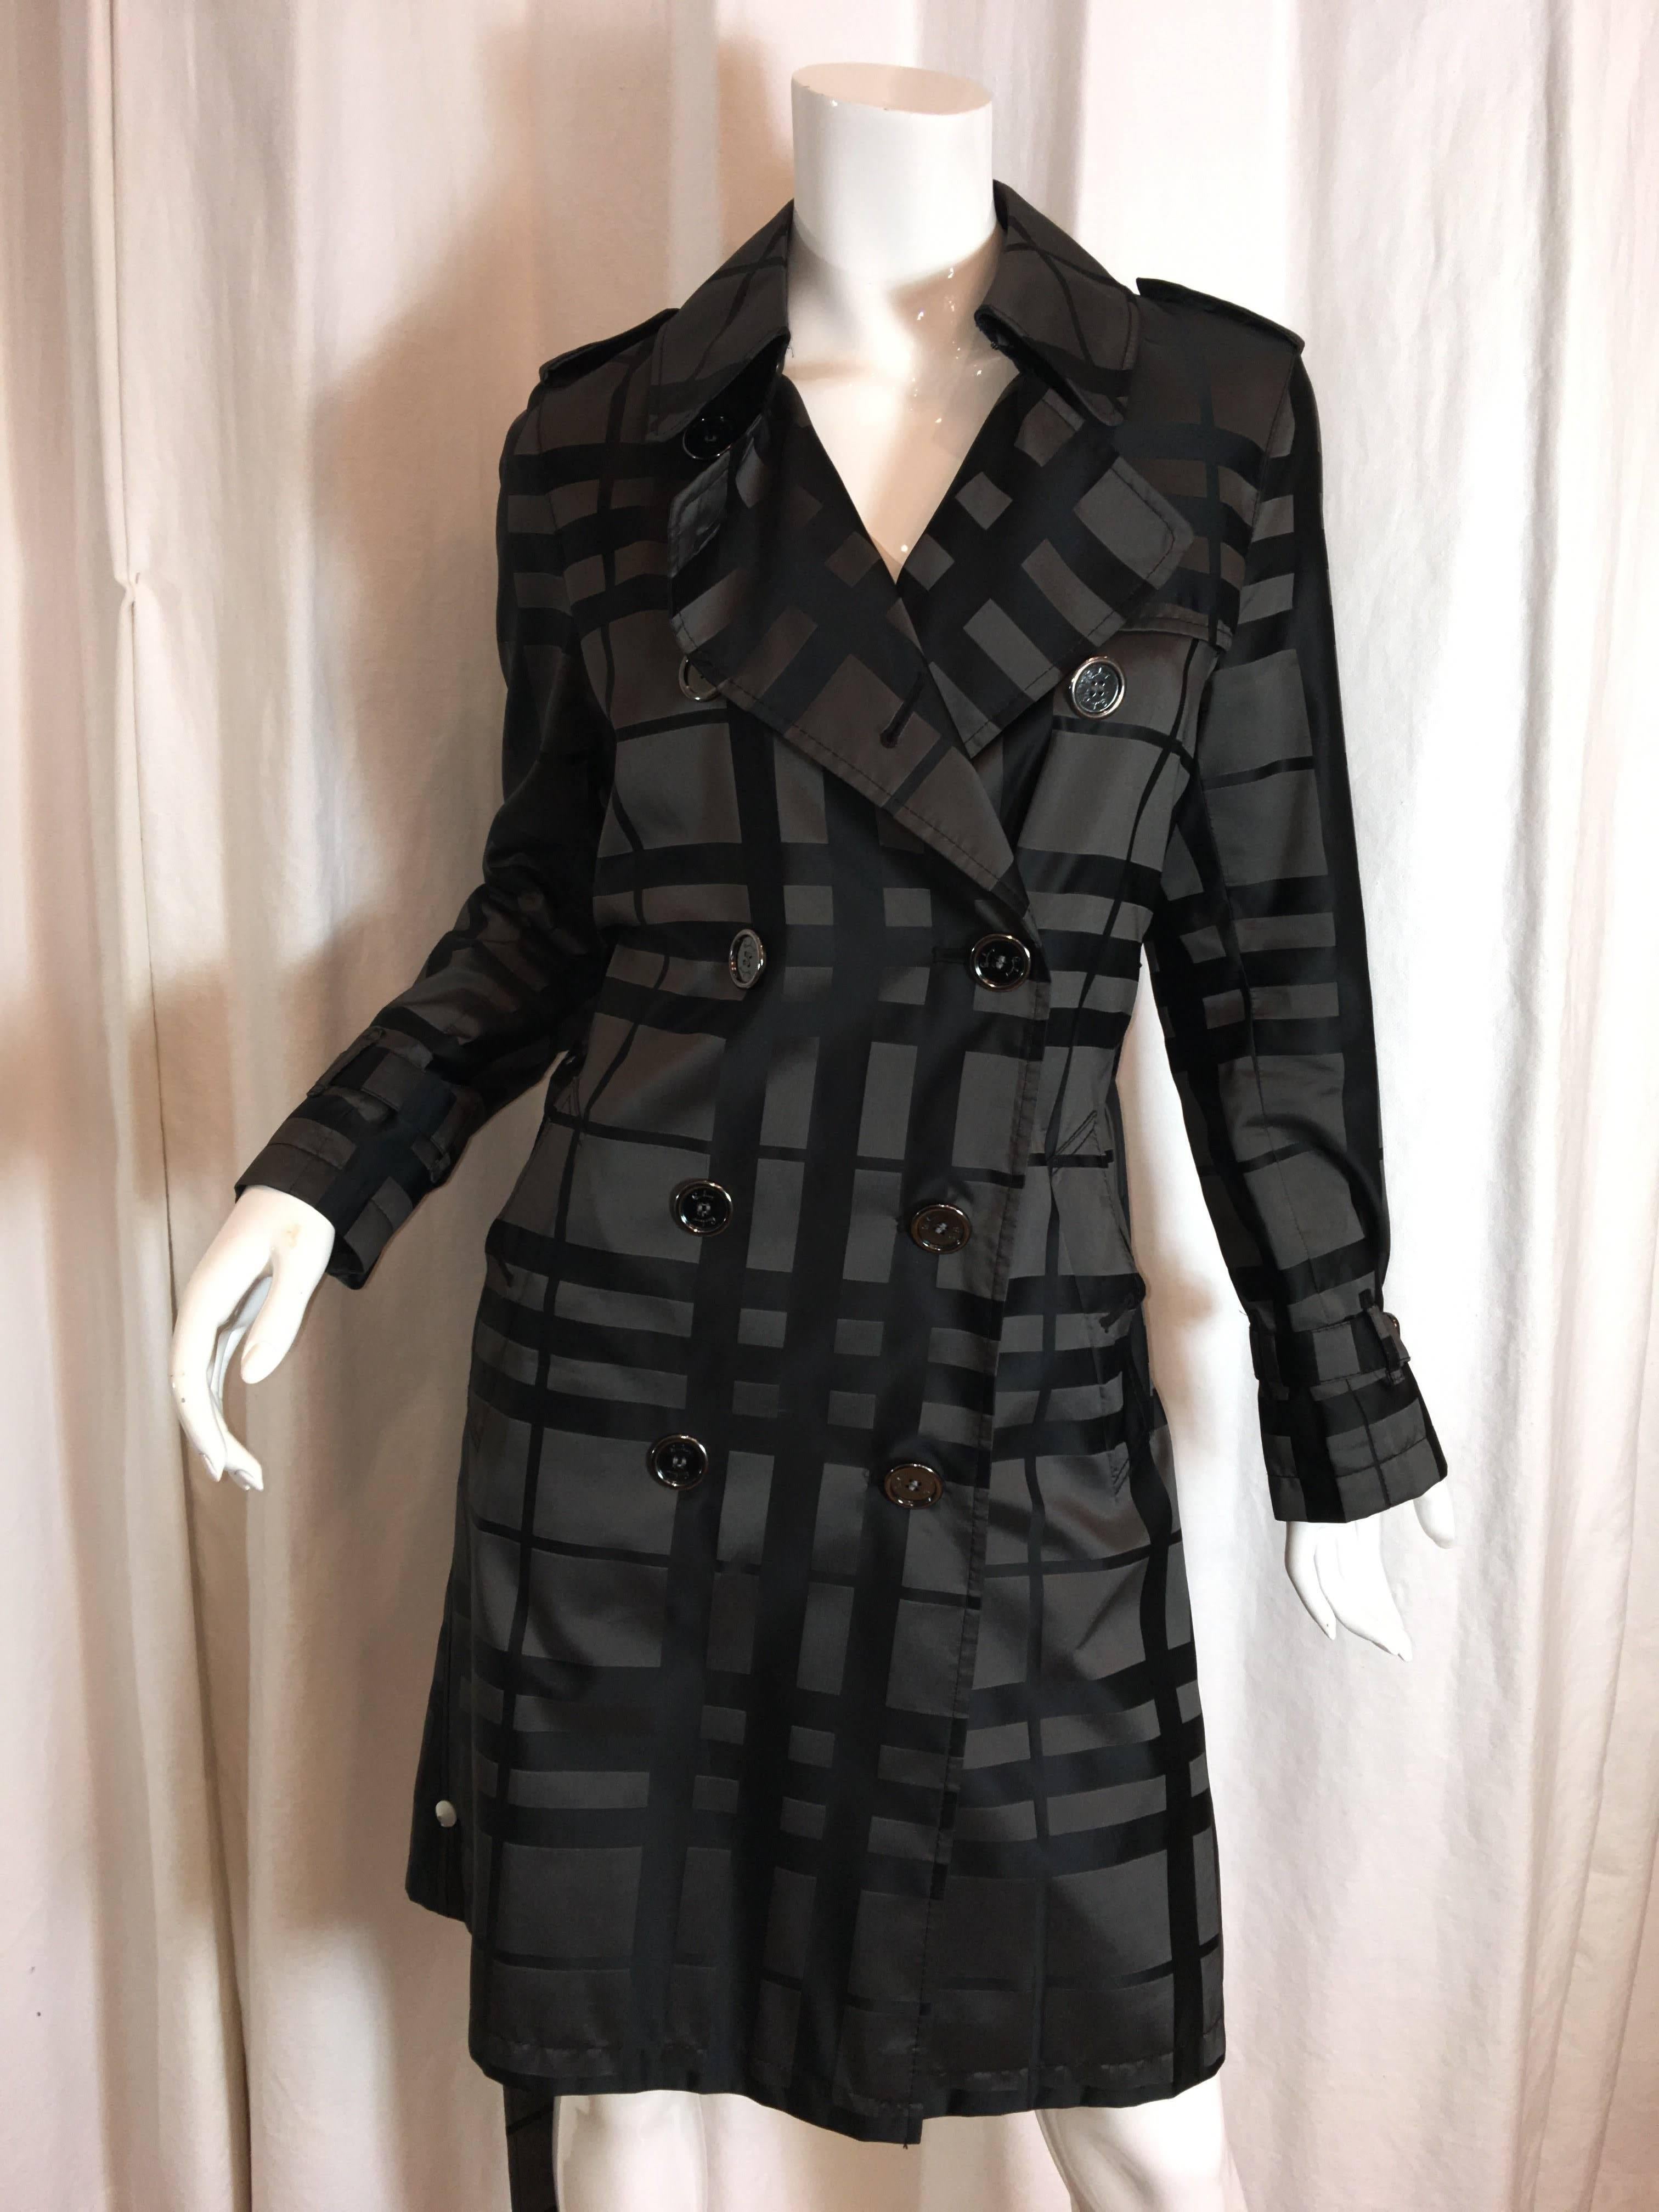 Black and Grey Plaid Burberry Trench coat with belt. 